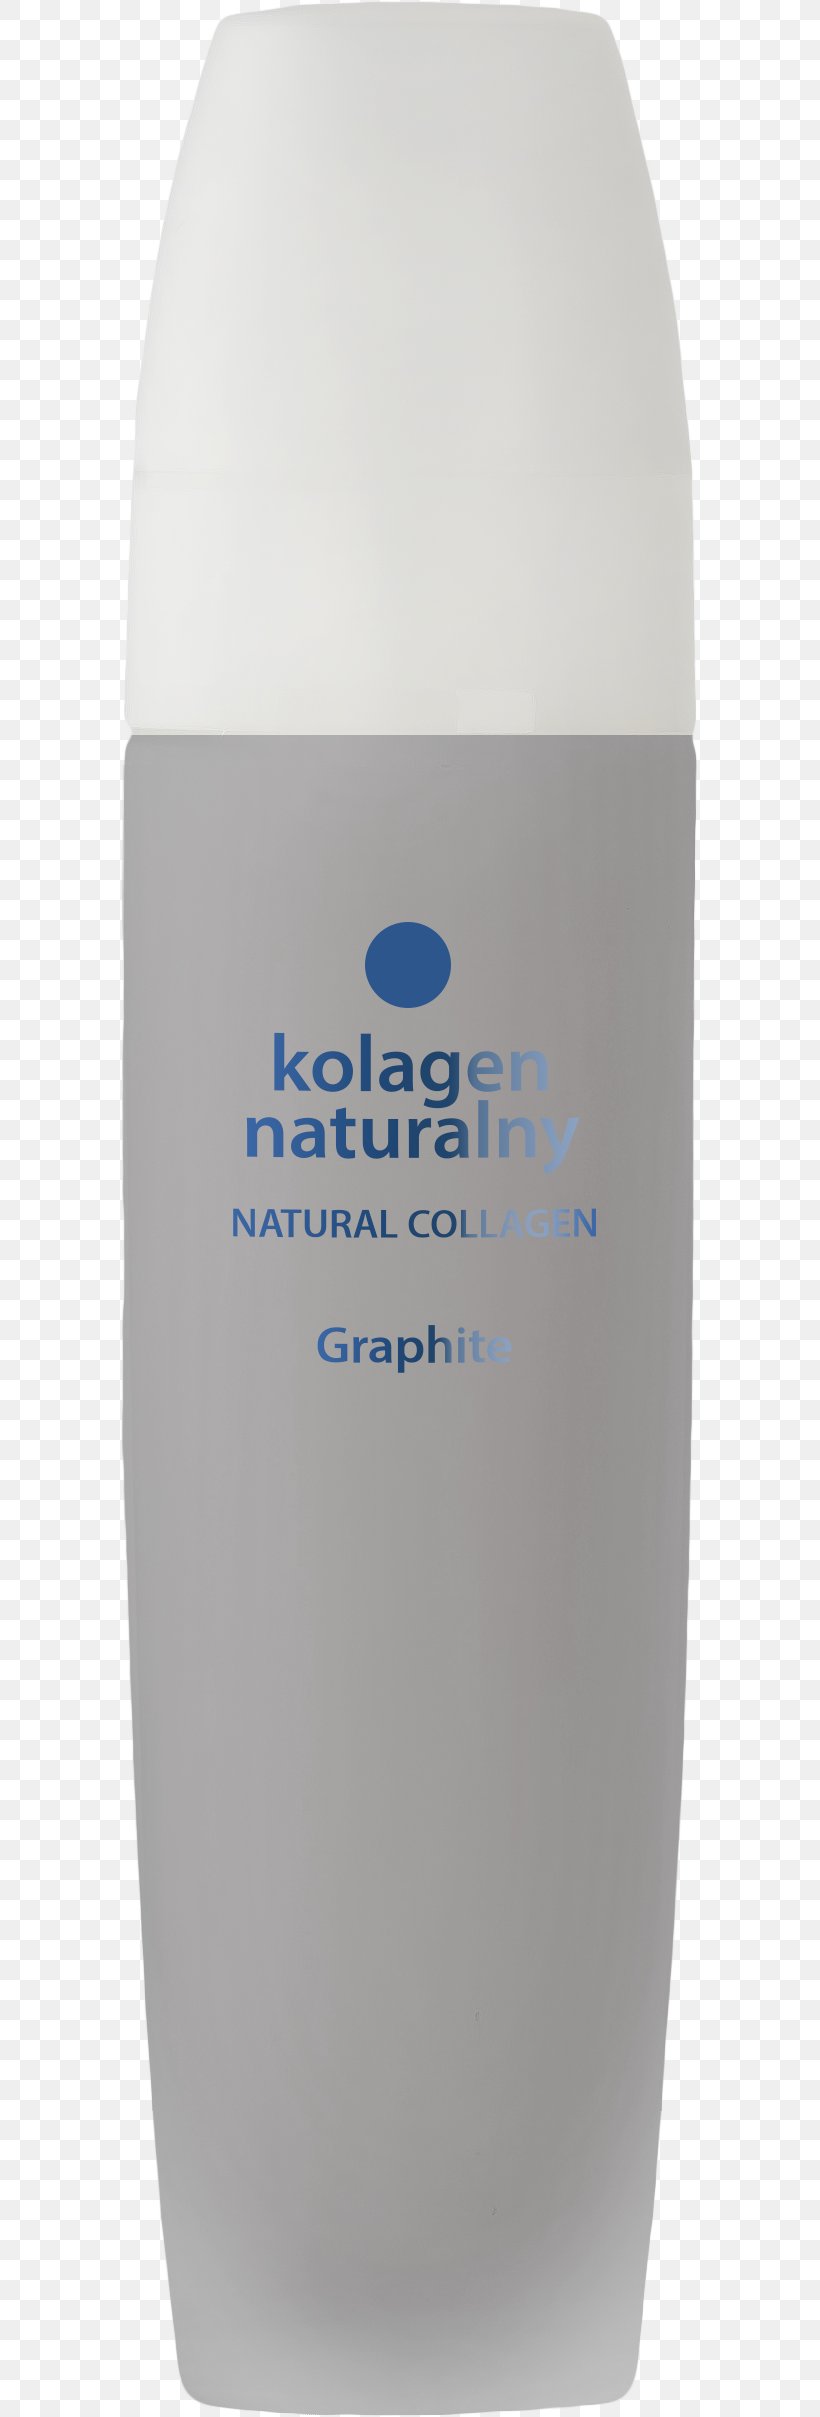 Lotion Water Liquid Culture, PNG, 577x2417px, Lotion, Culture, Liquid, Water Download Free